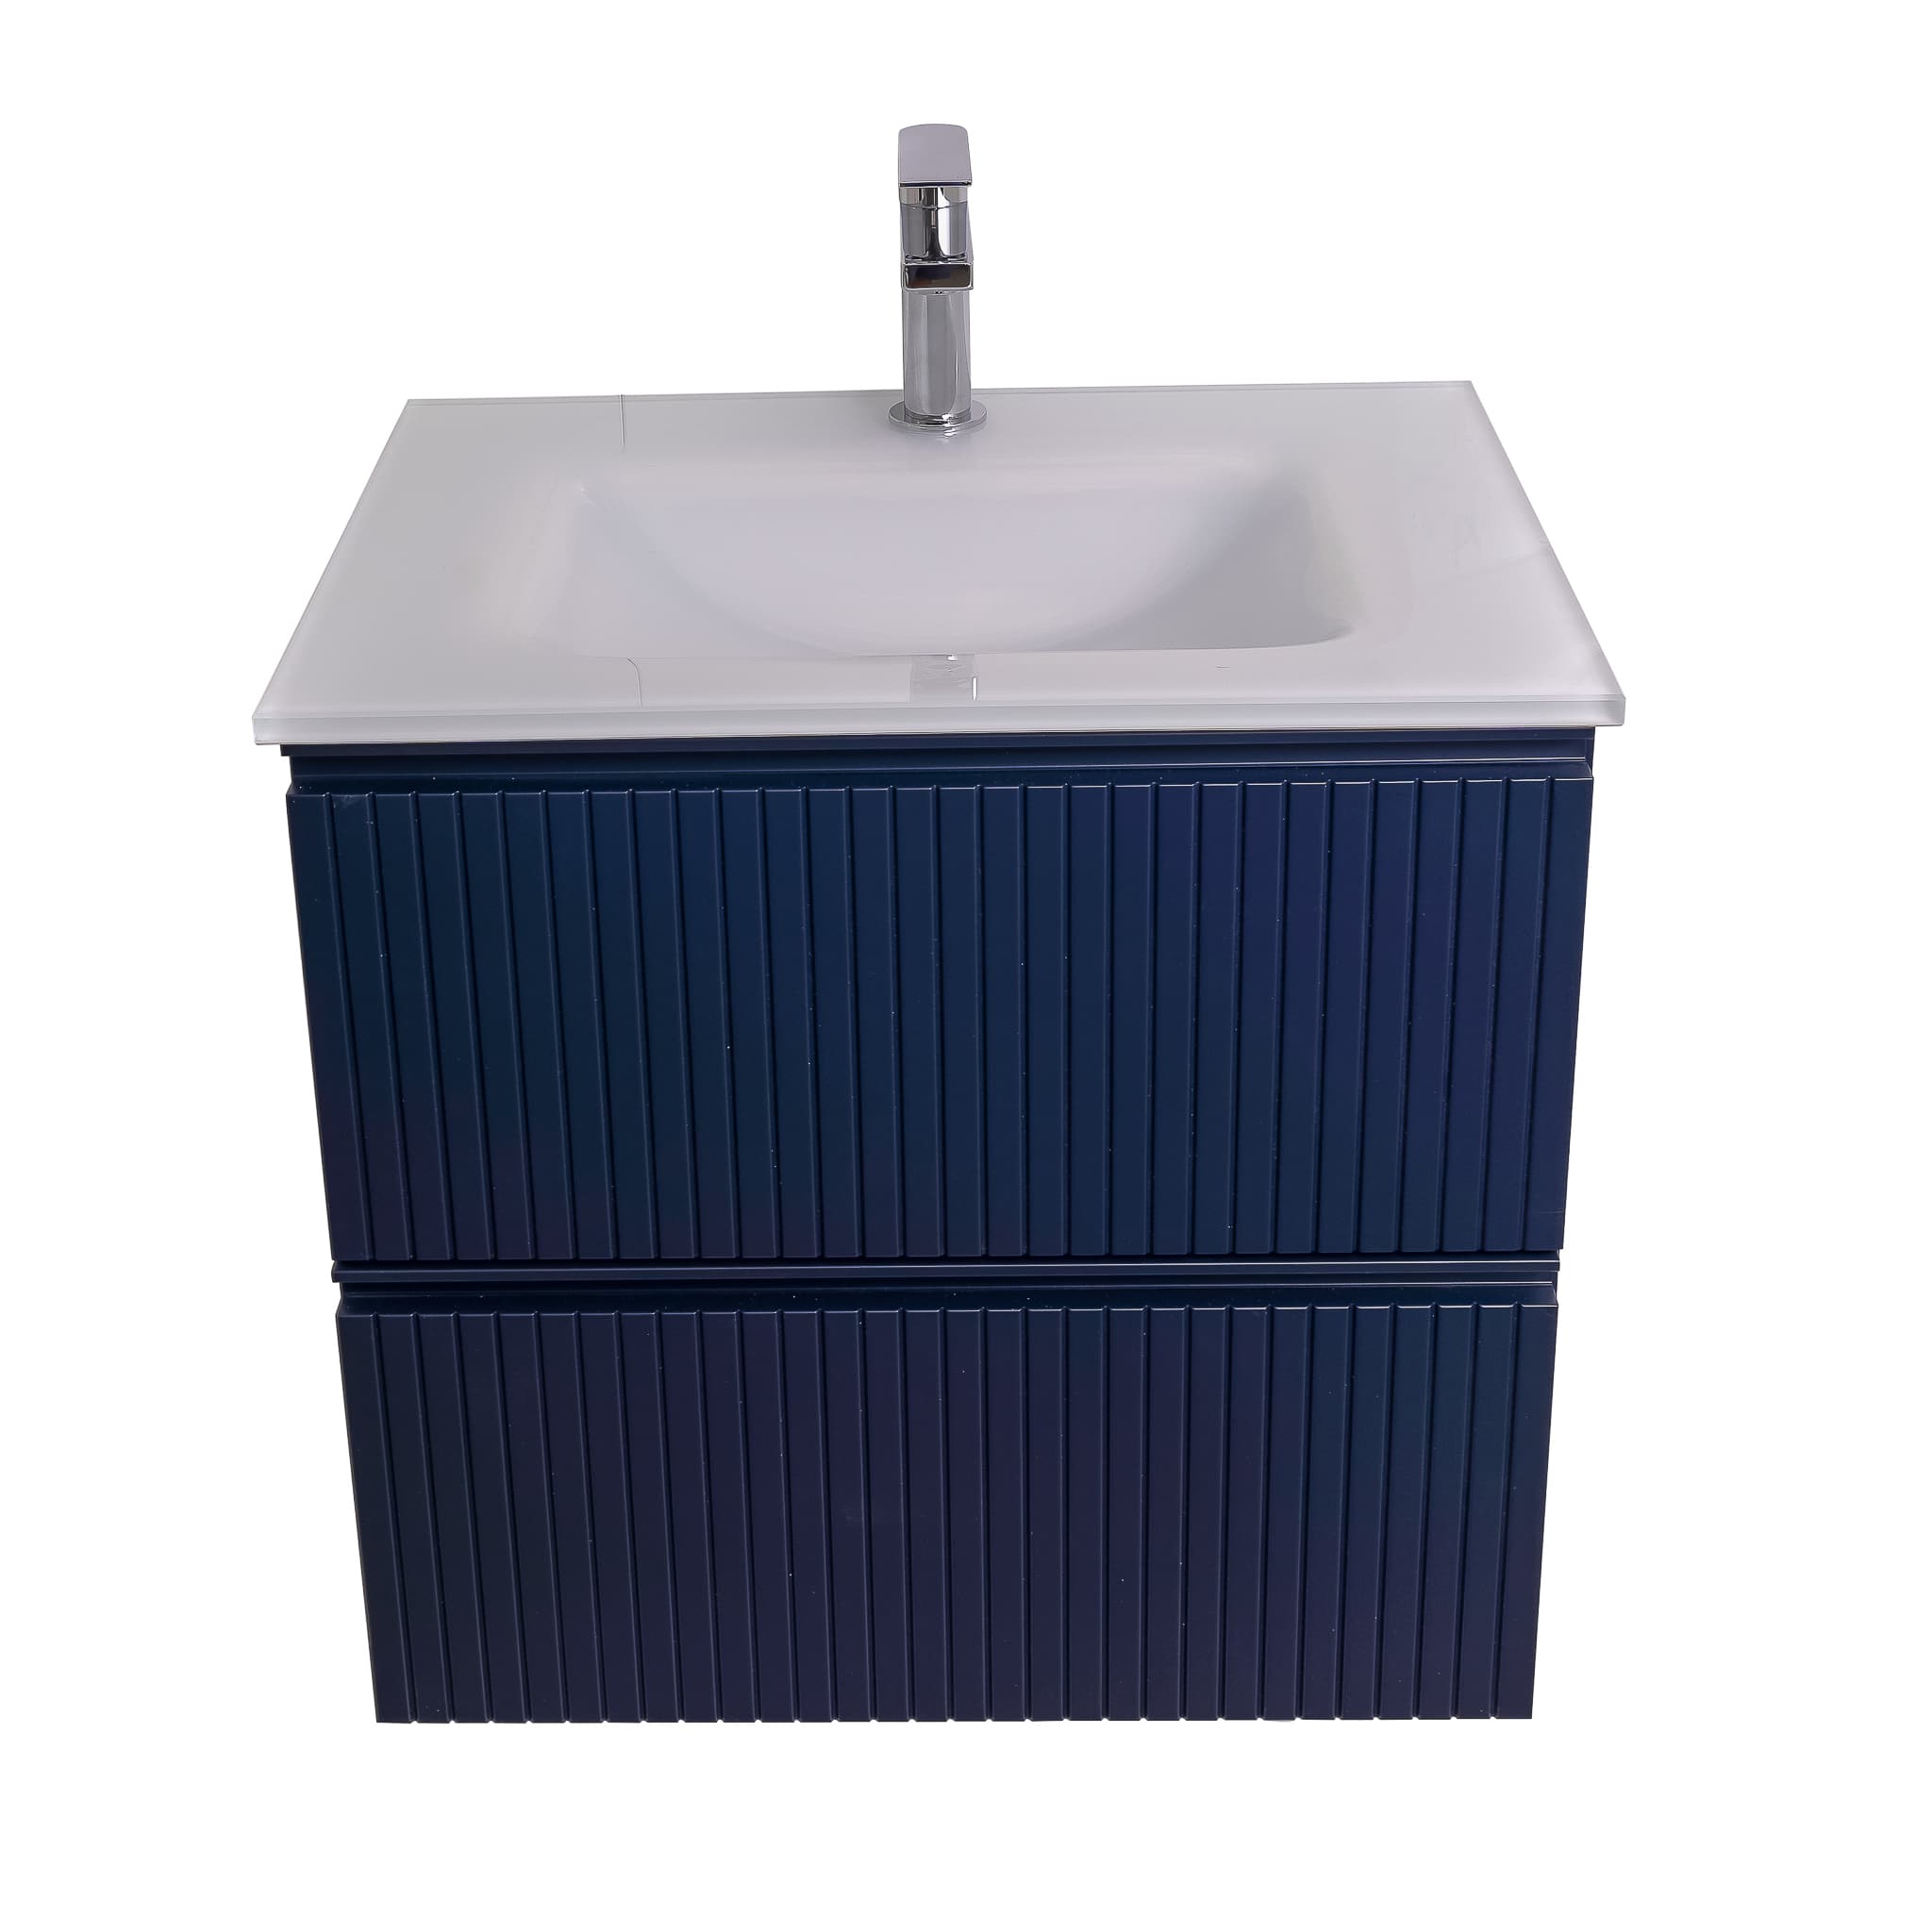 Ares 23.5 Matte Navy Blue Cabinet, White Tempered Glass Sink, Wall Mounted Modern Vanity Set